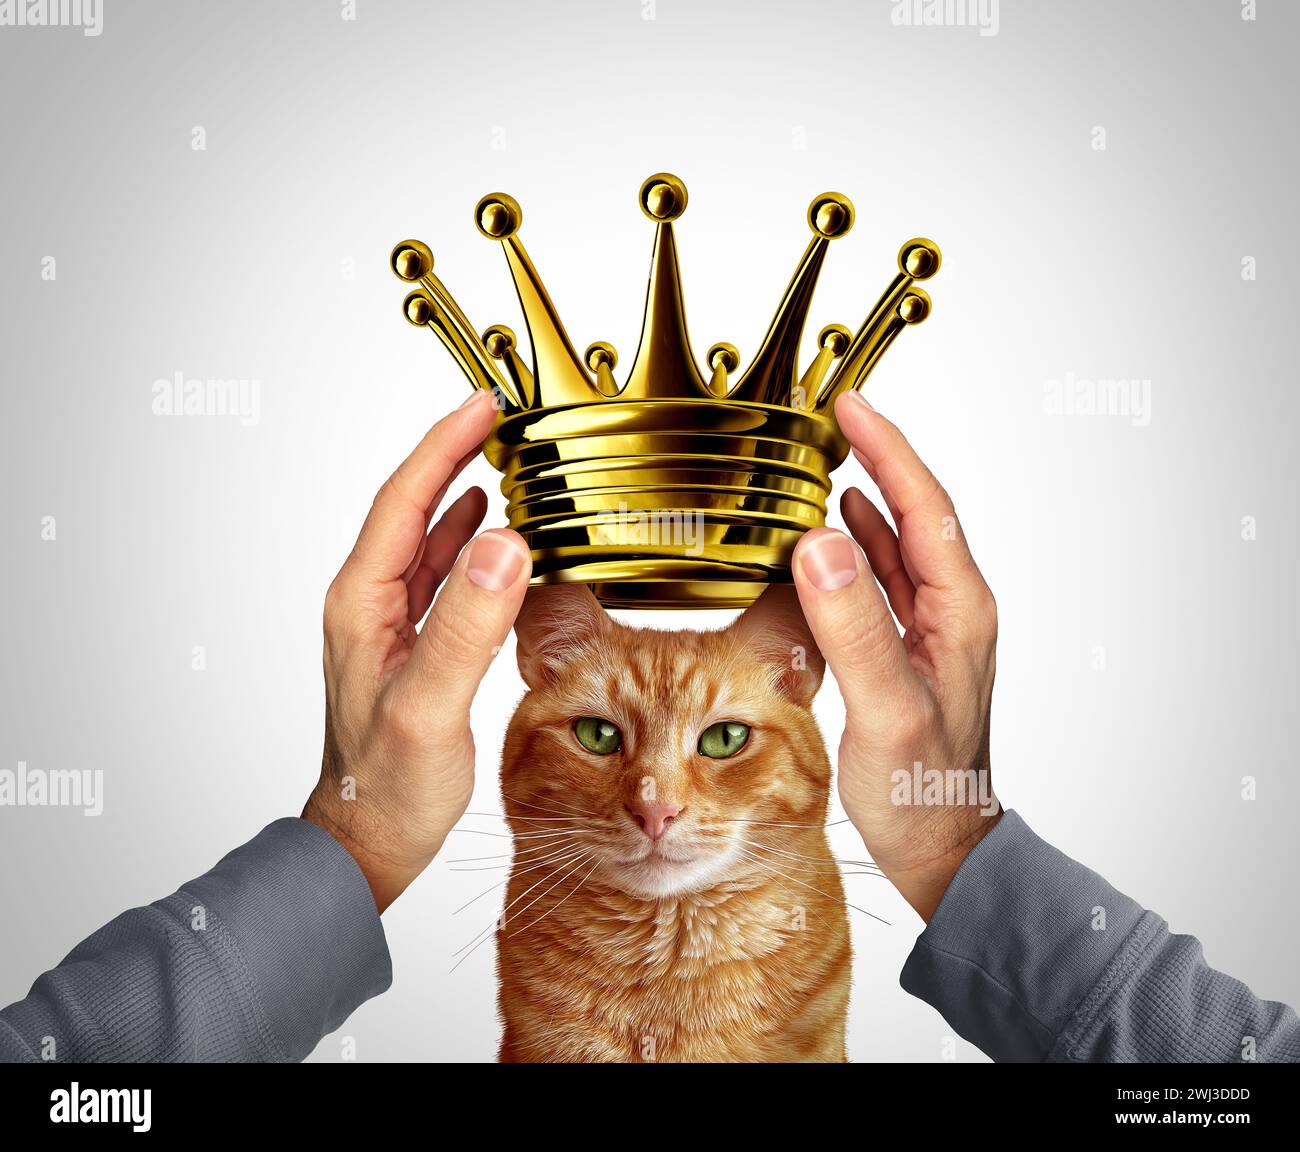 Best cat award and Feline Crowning Coronation as a kitten Crown as a person bestowing or granting a Gold or golden headpiece on a lovable furry pet Stock Photo